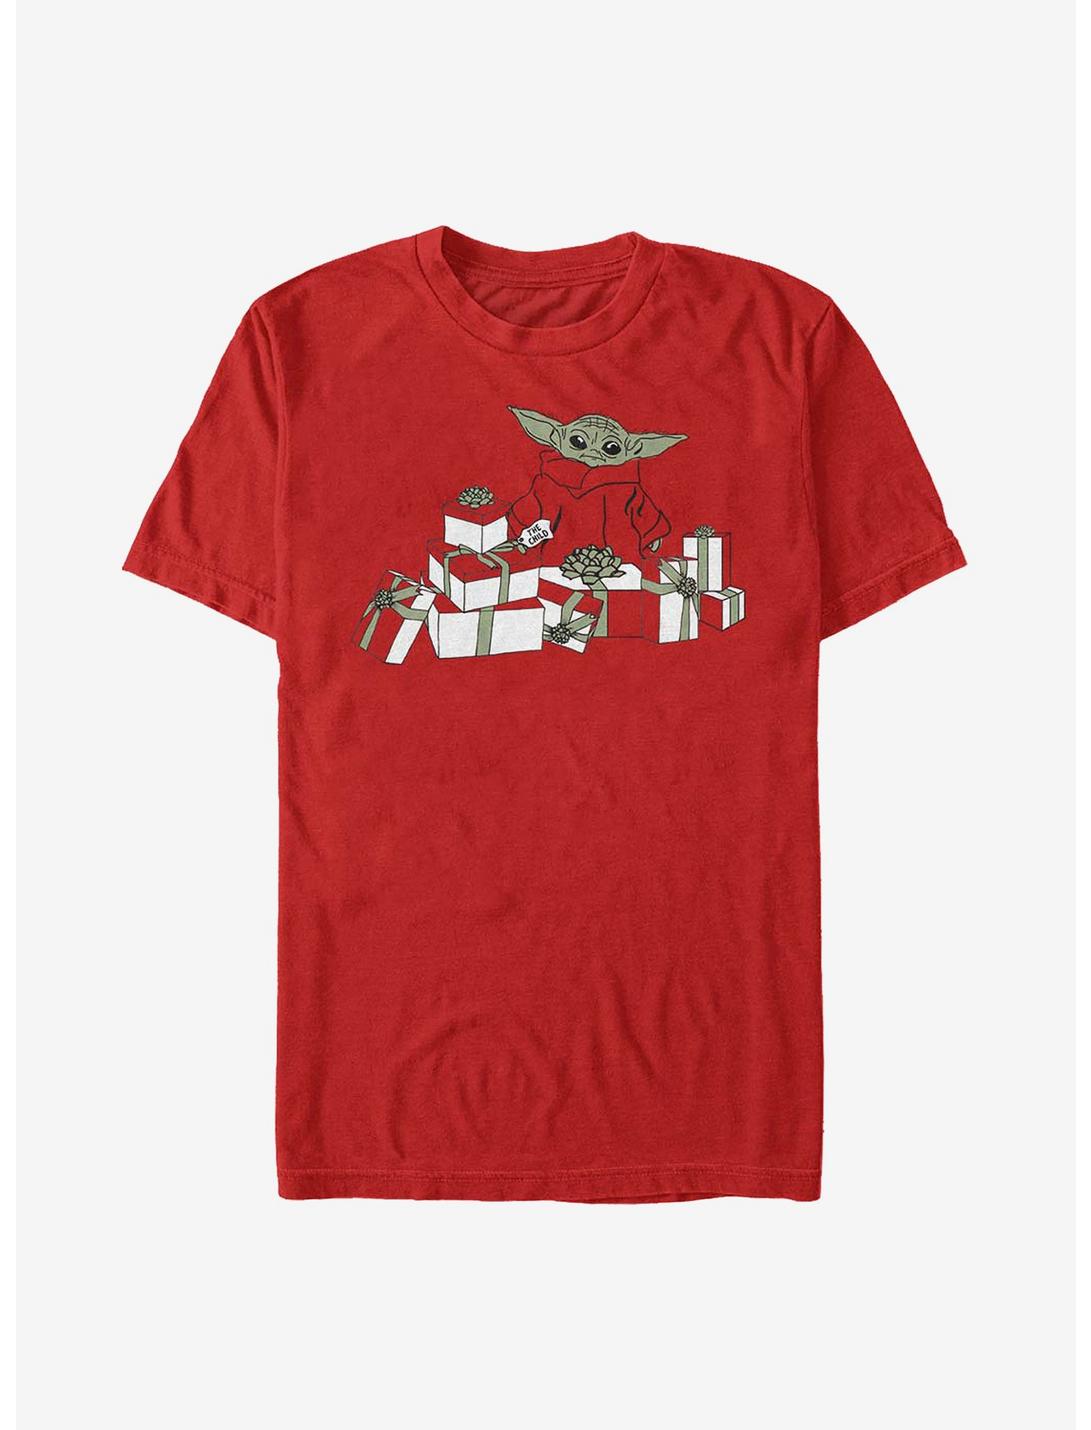 Star Wars The Mandalorian The Child Holiday T-Shirt, RED, hi-res